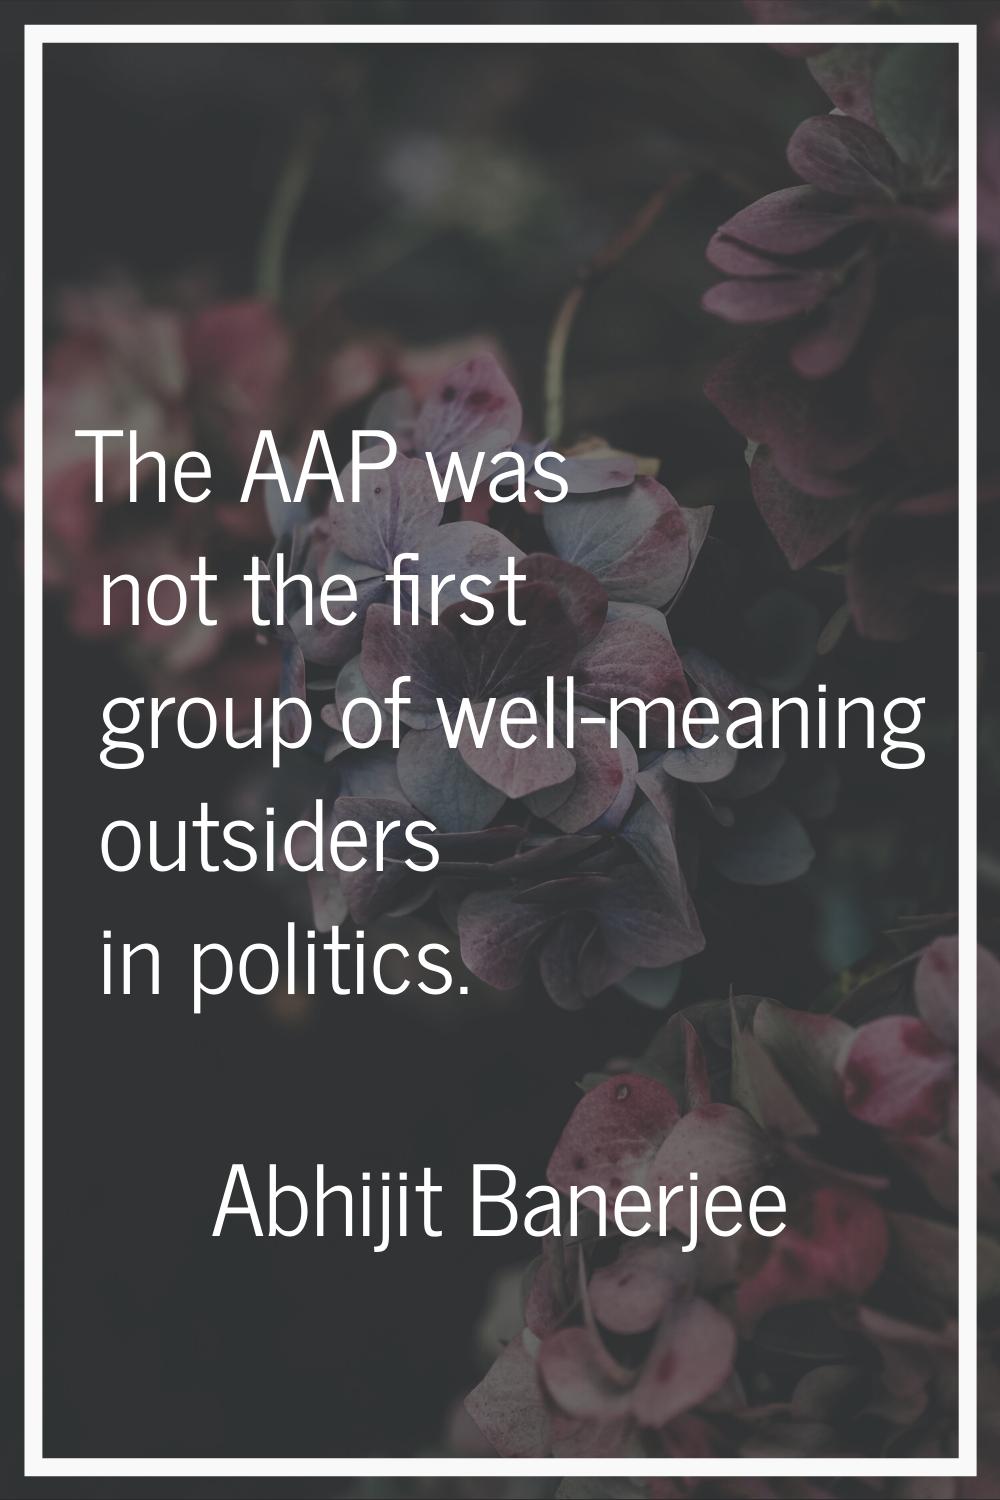 The AAP was not the first group of well-meaning outsiders in politics.